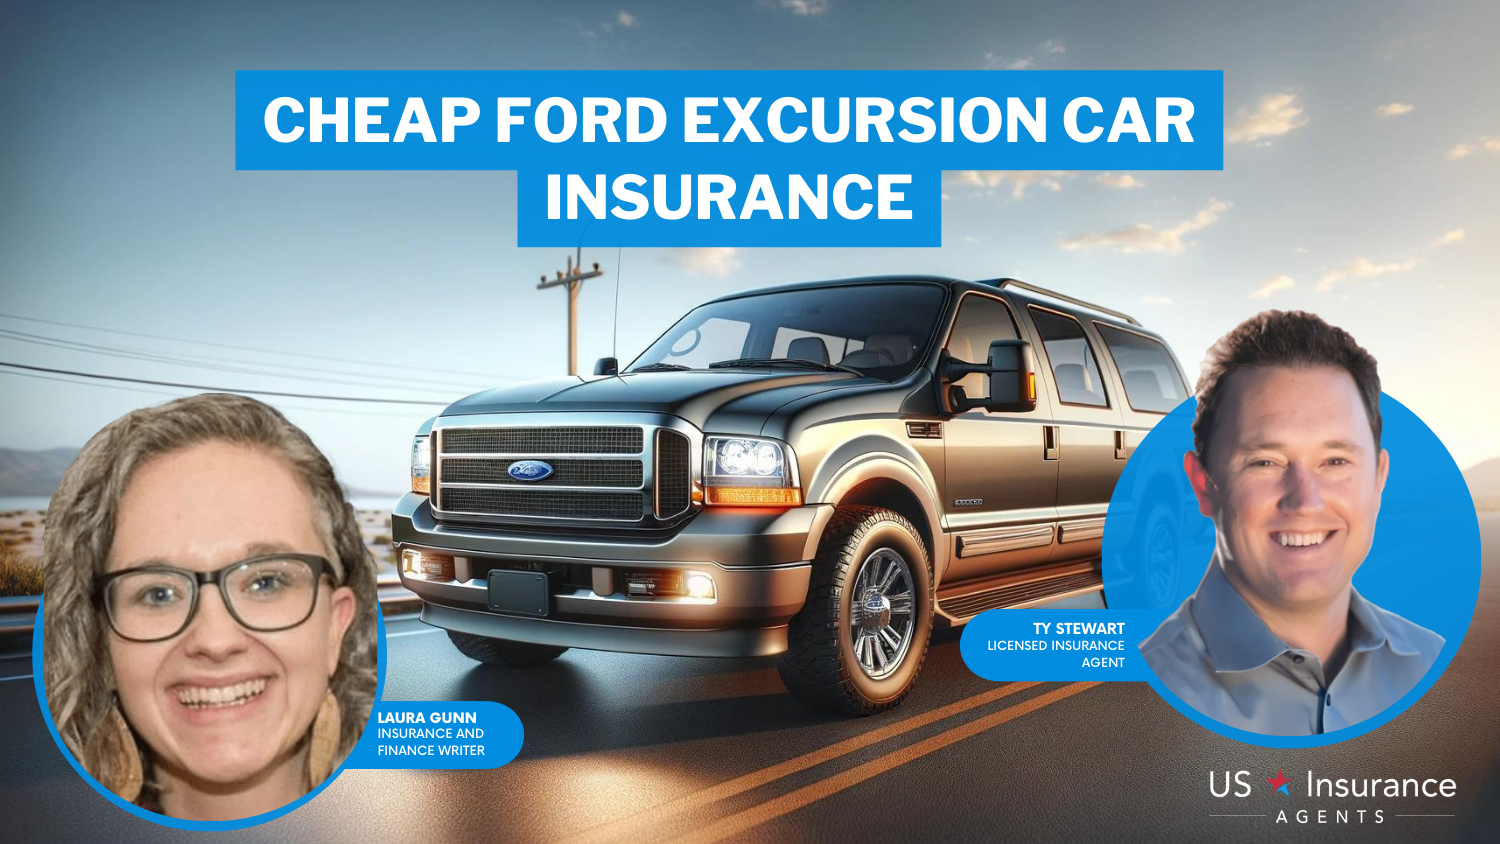 Cheap Ford Excursion Car Insurance: State Farm, Progressive, and AAA